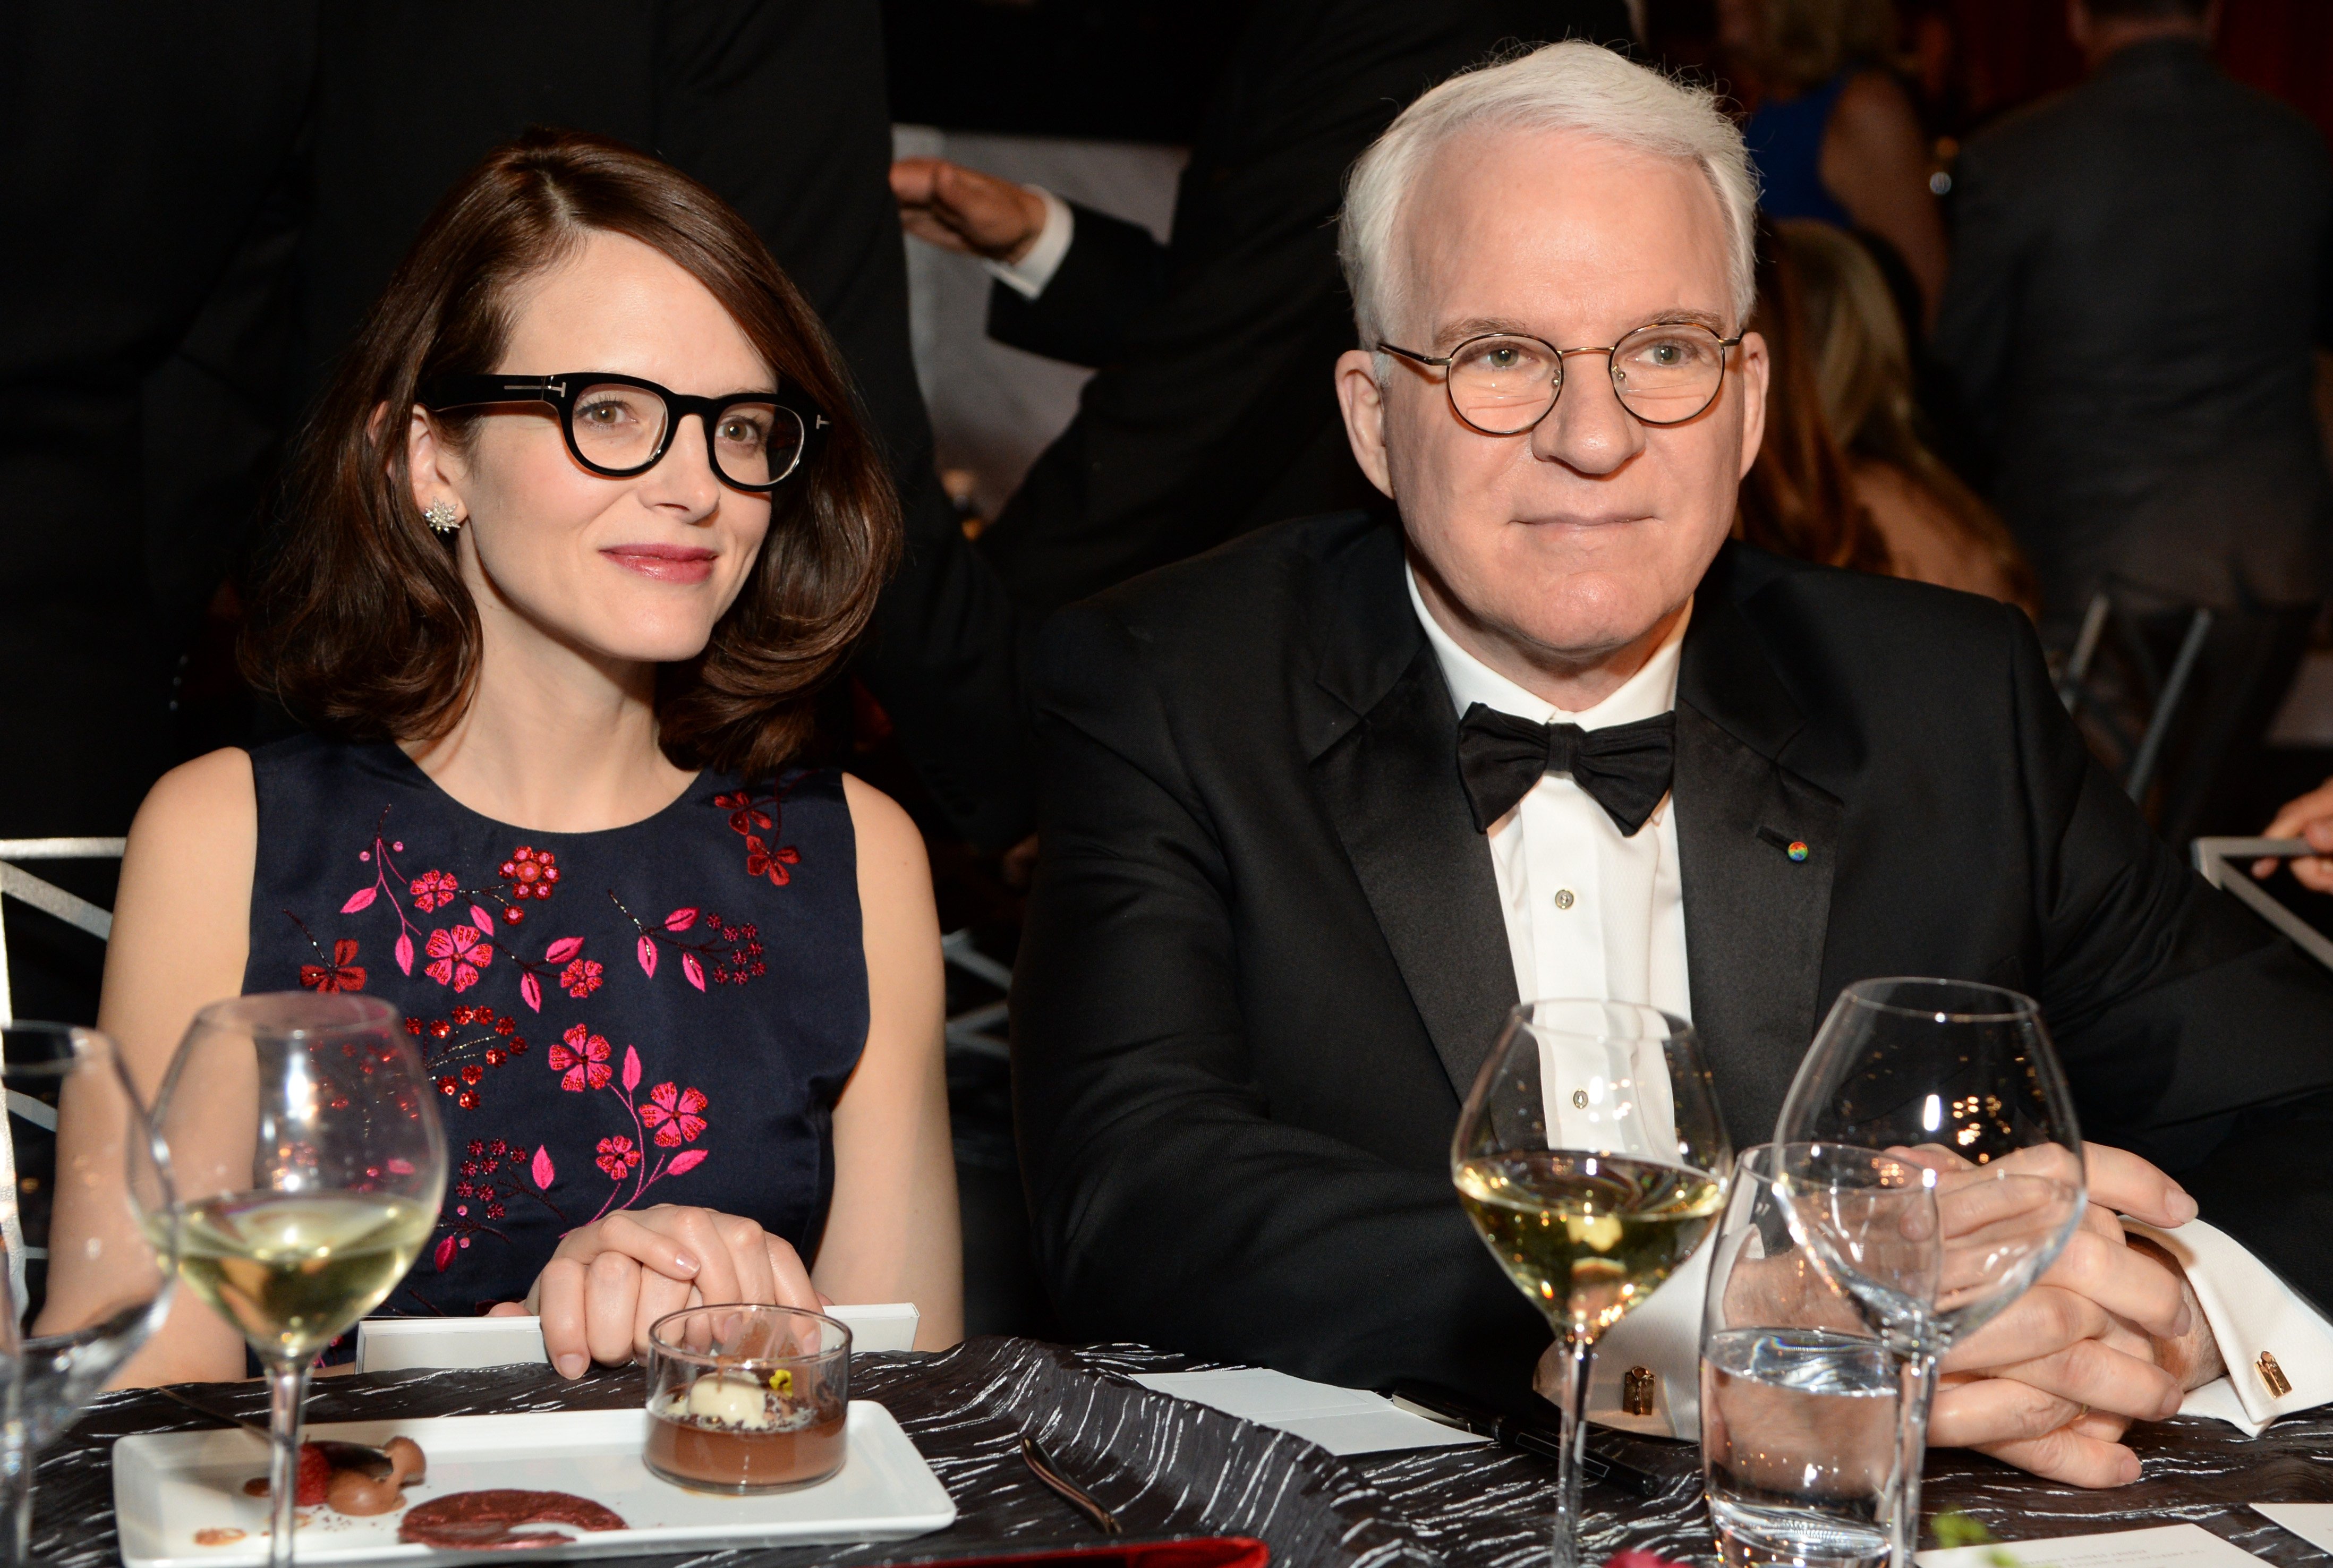 Writer Anne Stringfield (L) and honoree Steve Martin attend the 43rd AFI Life Achievement Award Gala honoring Steve Martin on June 4, 2015, in Hollywood, California. | Source: Getty Images